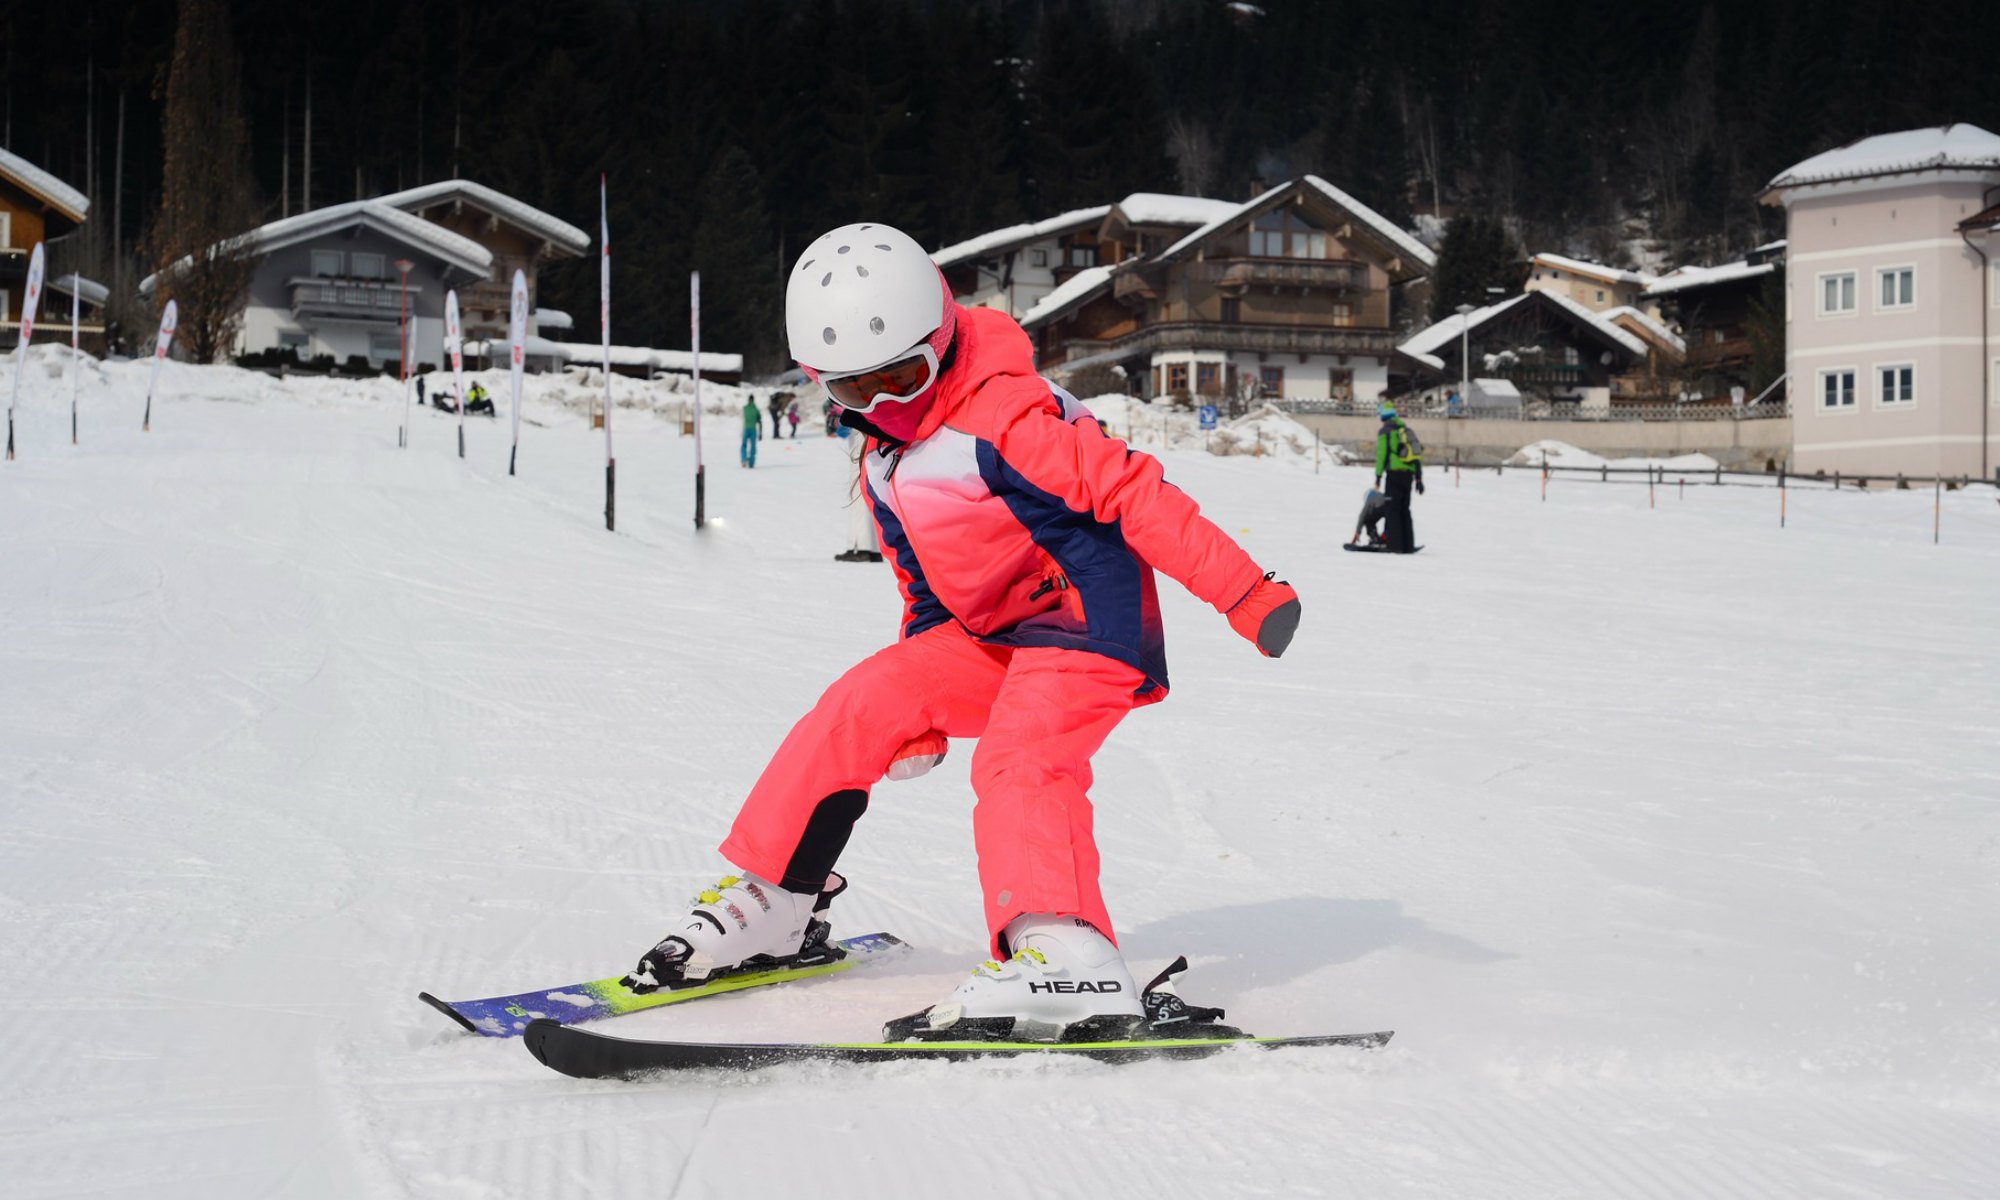 Child skiing down the slope in a snow plough turn.